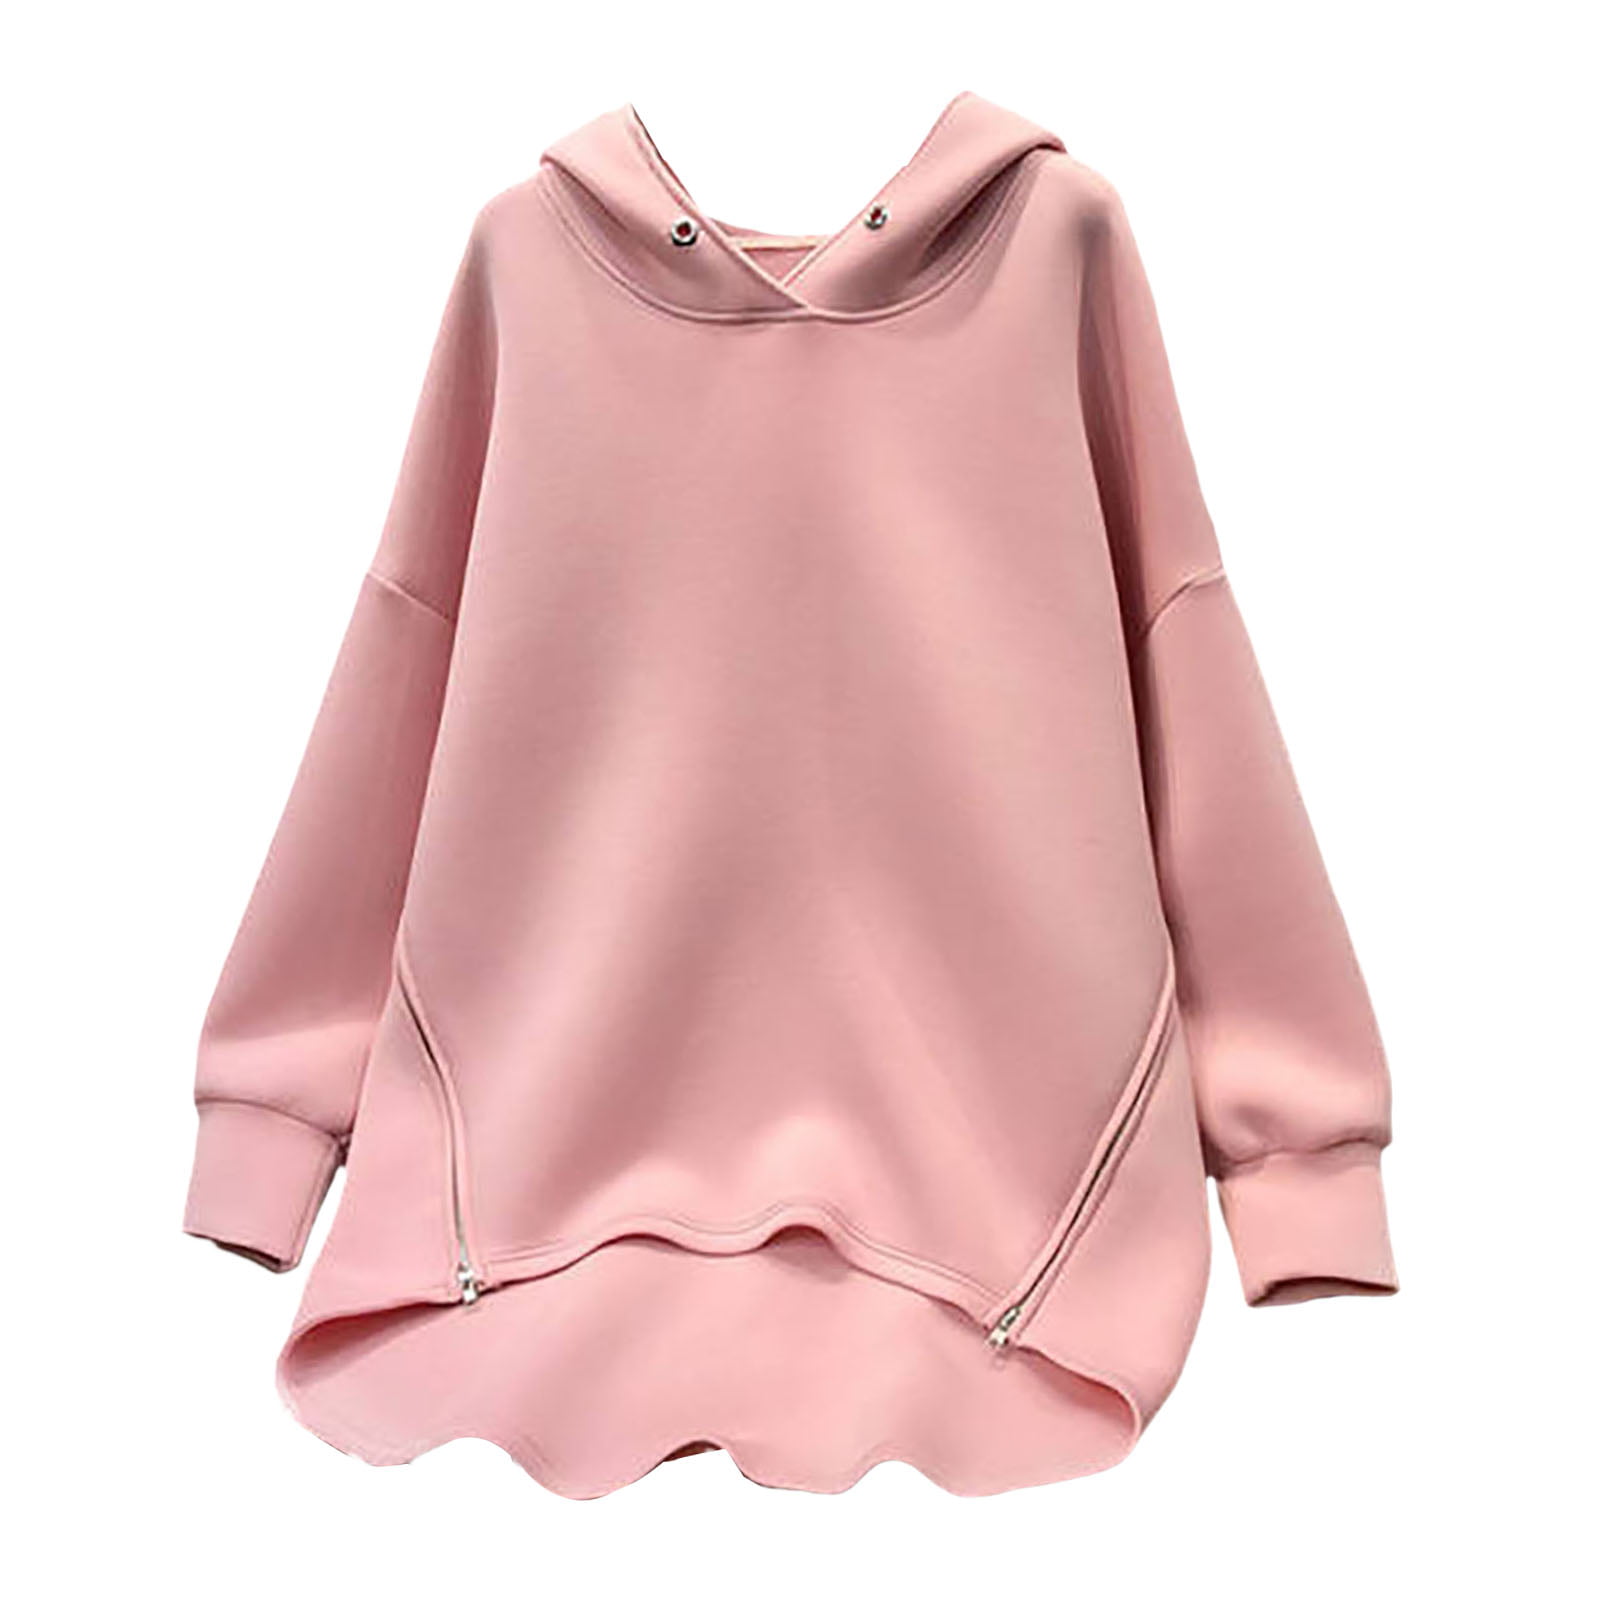  PUTEARDAT Hoodies for Women Sleeved Pullover Knitted Autumn  pink outfit button down blouses for women best of sales white shirts for  women clearance items under 1.00 brown top : Clothing, Shoes